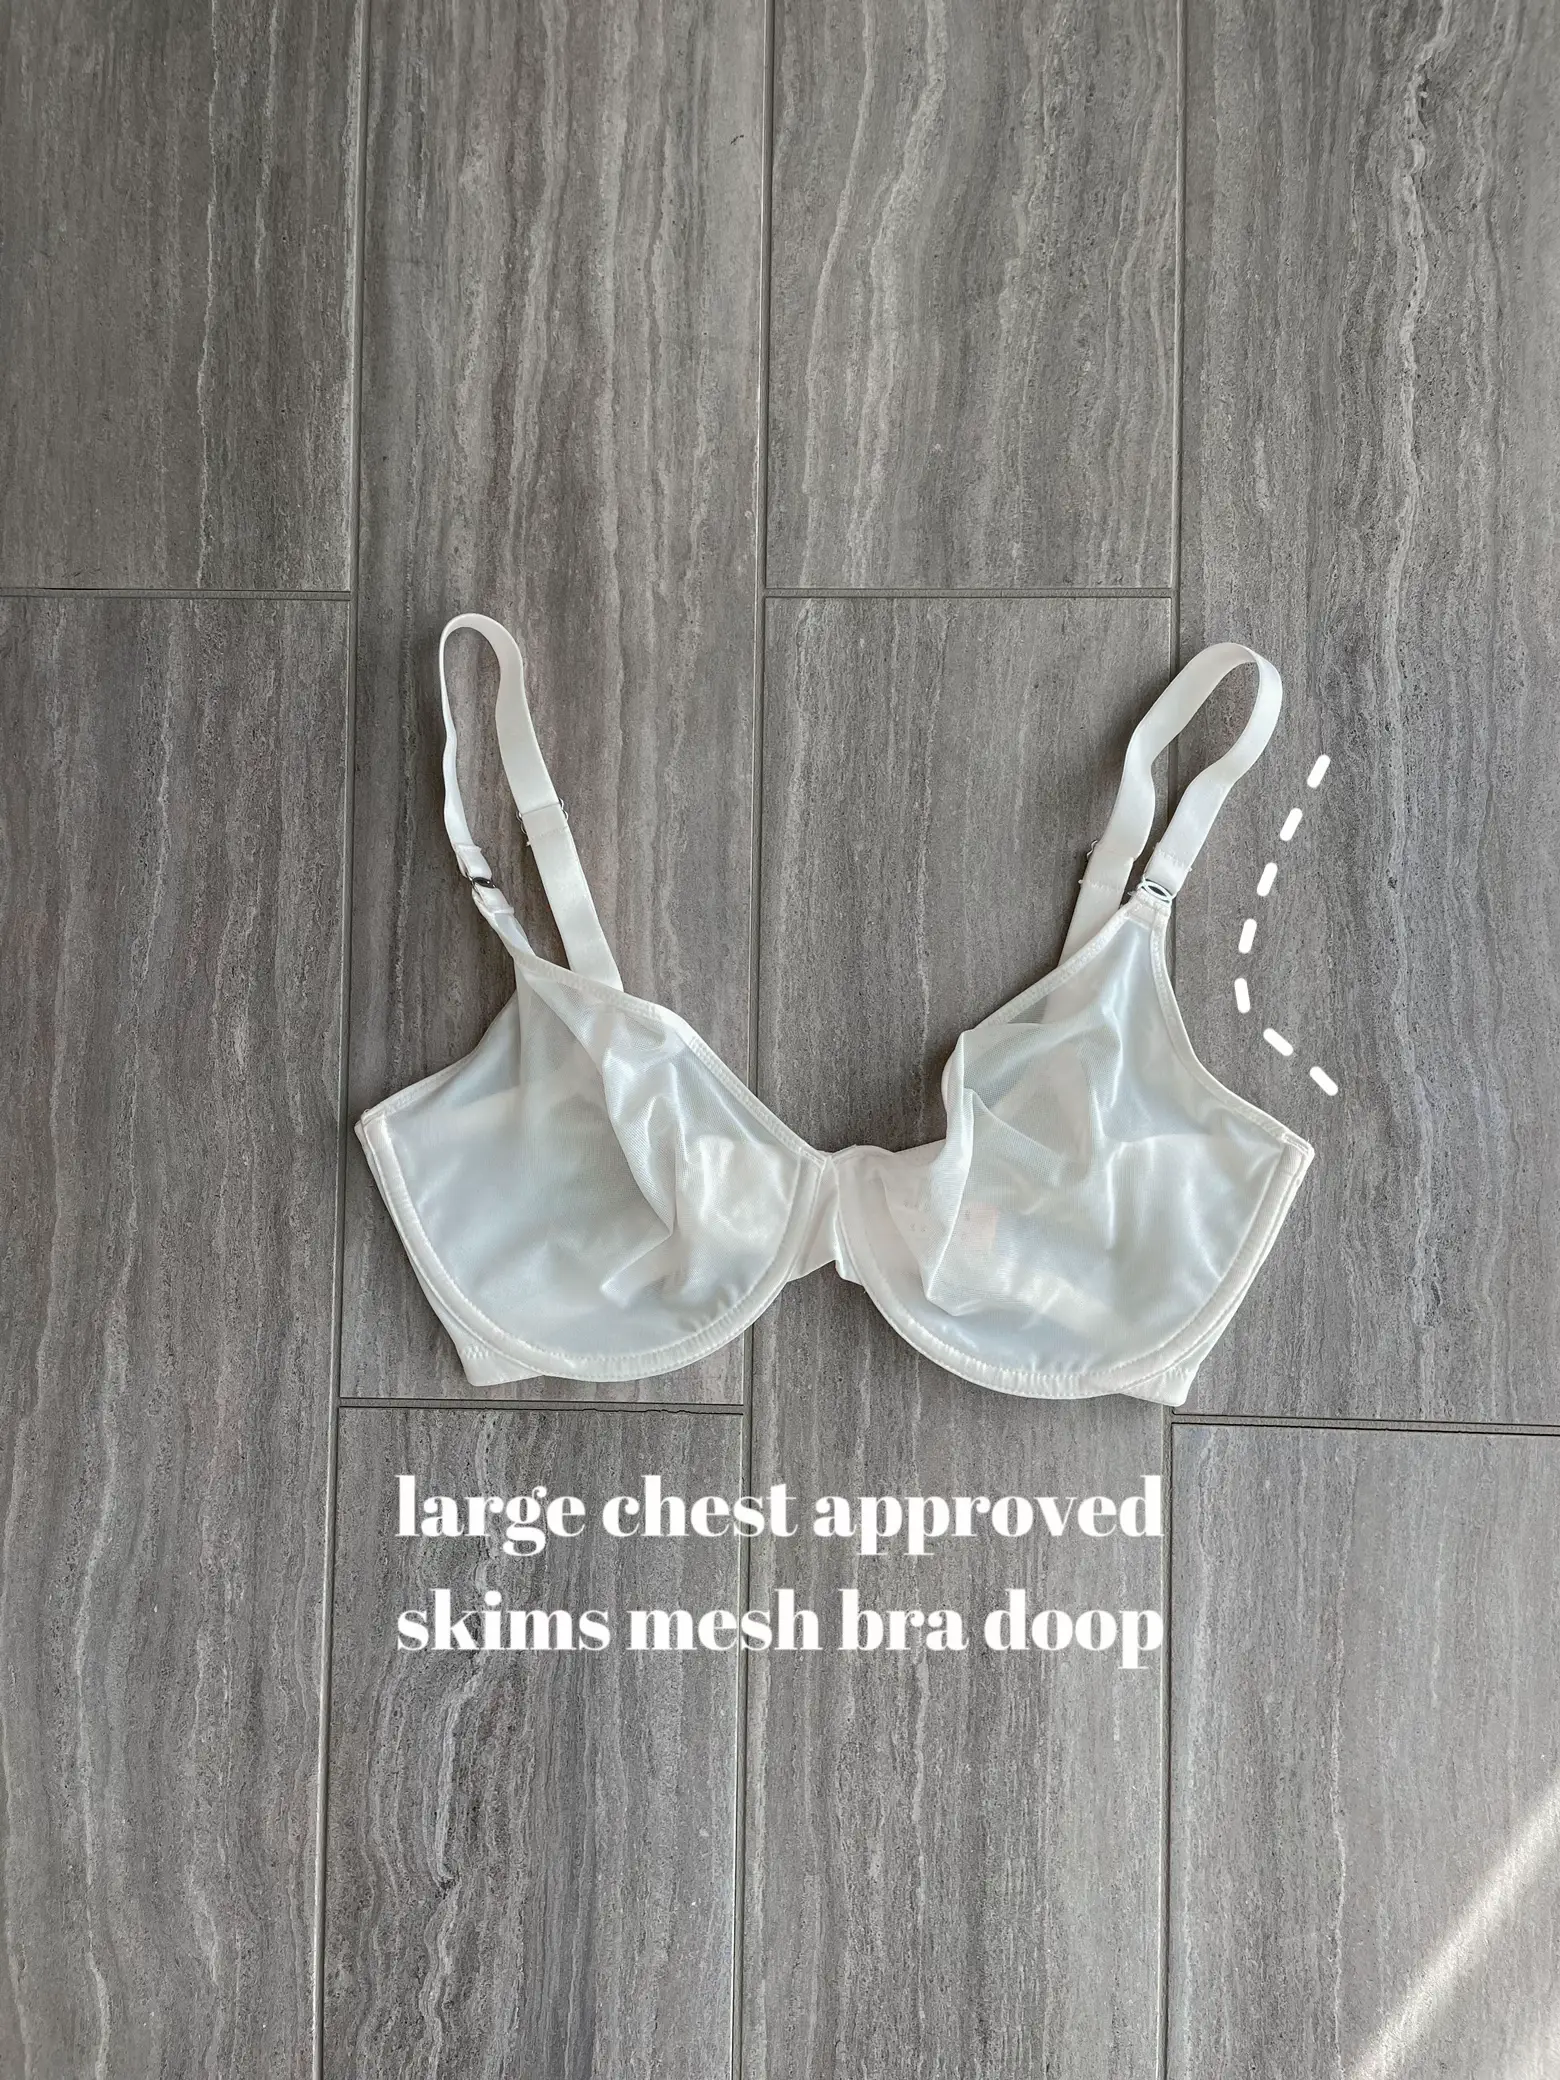  A white image of a bra with a doop on it.